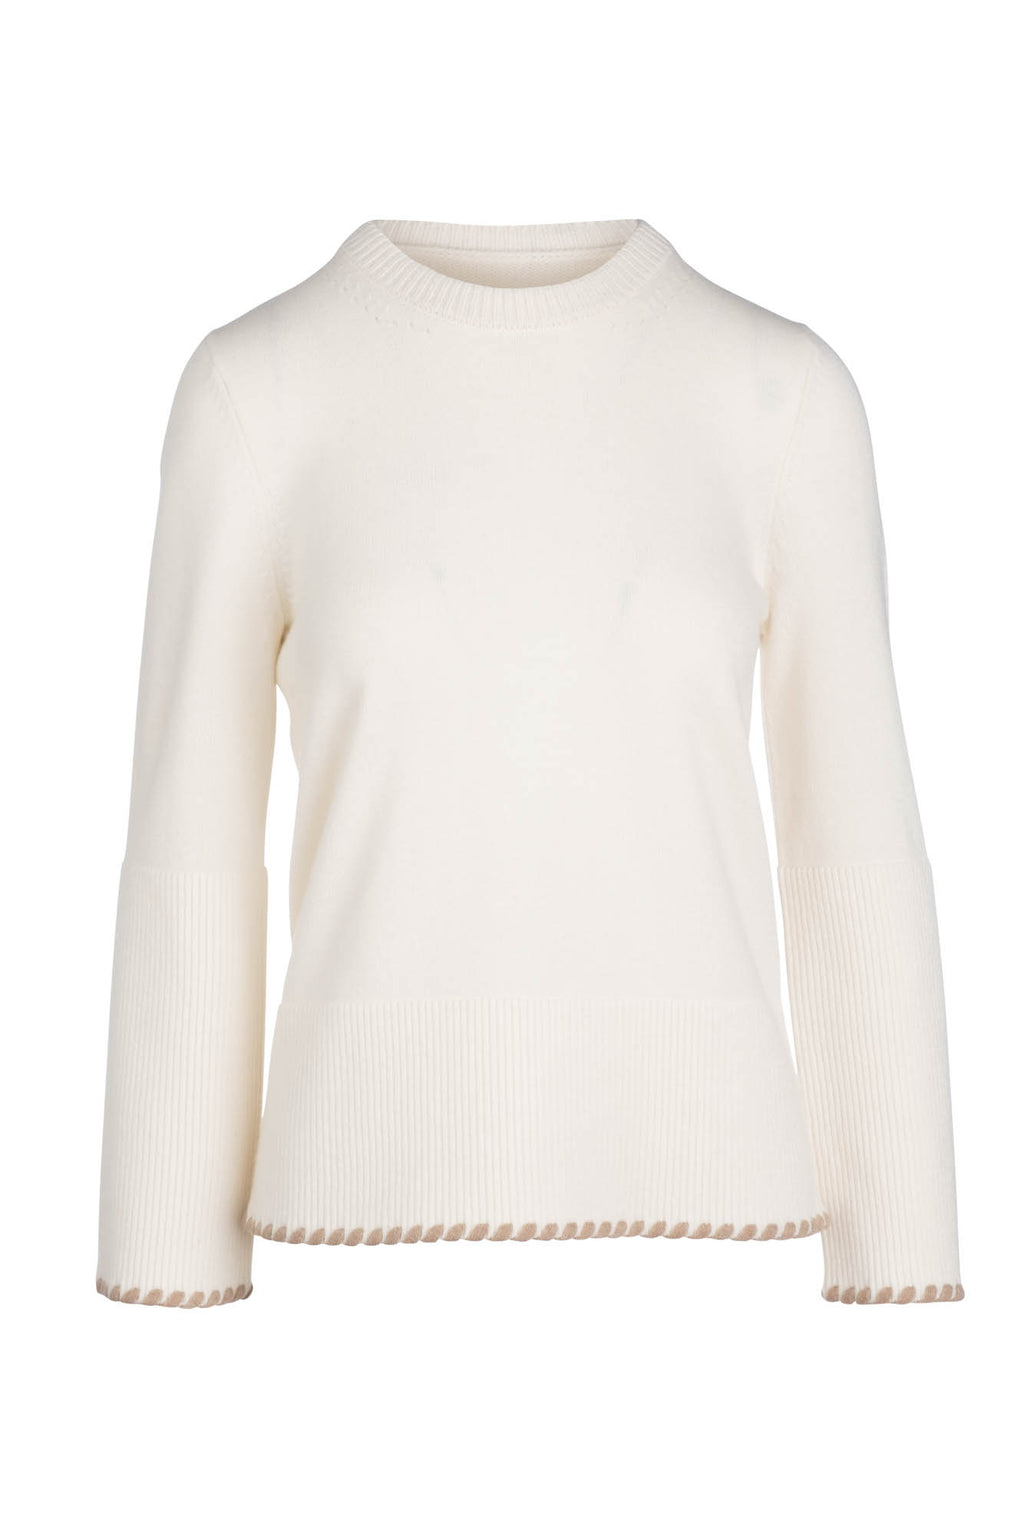 Thyme Sweater - Ivory